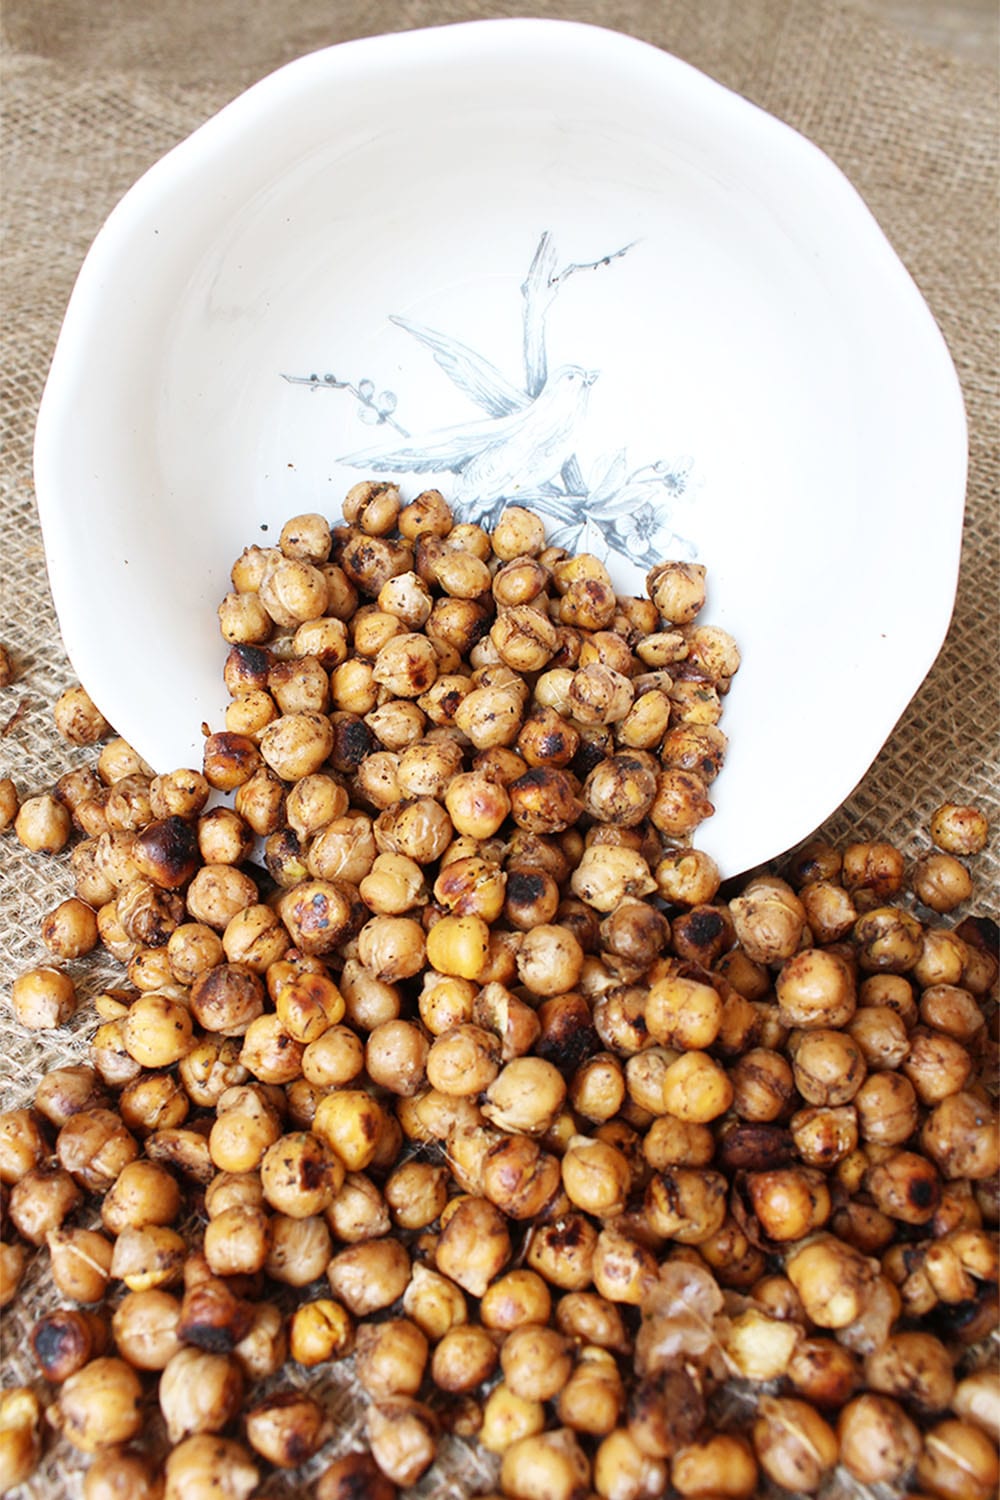 What are the best plant protein foods and just how much protein is in them? With a whopping 14.5 grams of protein per cup, chickpeas are definitely one of them. And they're so versatile! These baked balsamic chickpeas taste fantastic with pasta, rice, mashed potatoes, sprinkled on a salad or on their own as a snack!